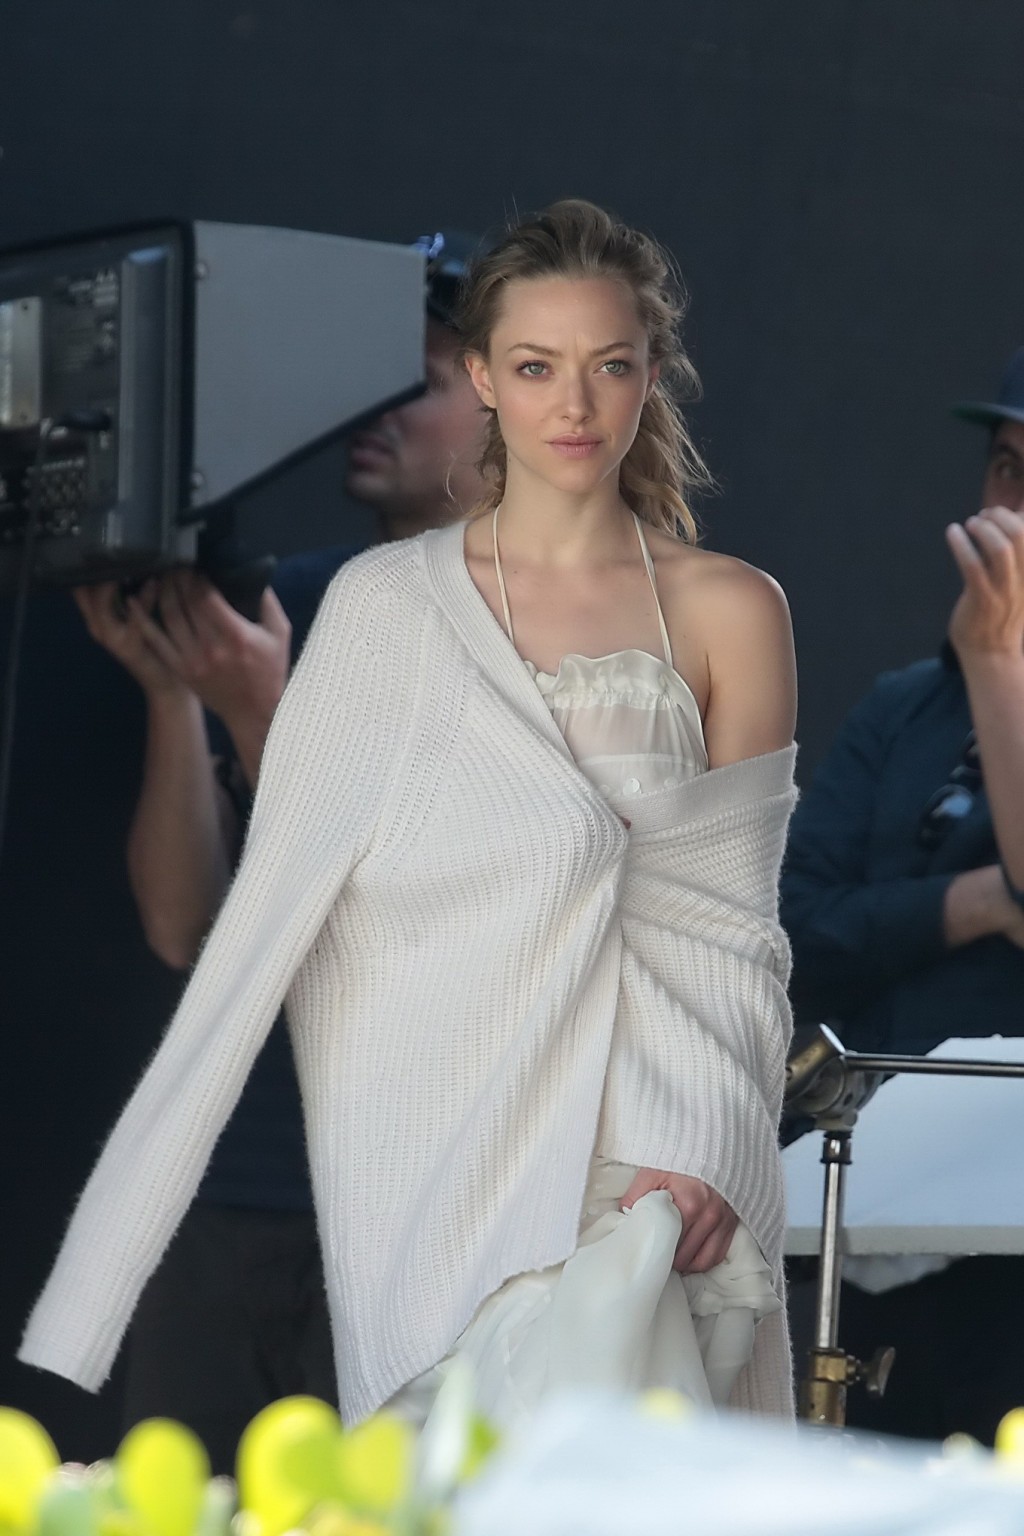 Amanda Seyfried showing boobs in white transparent nightie while filming video i #75172487